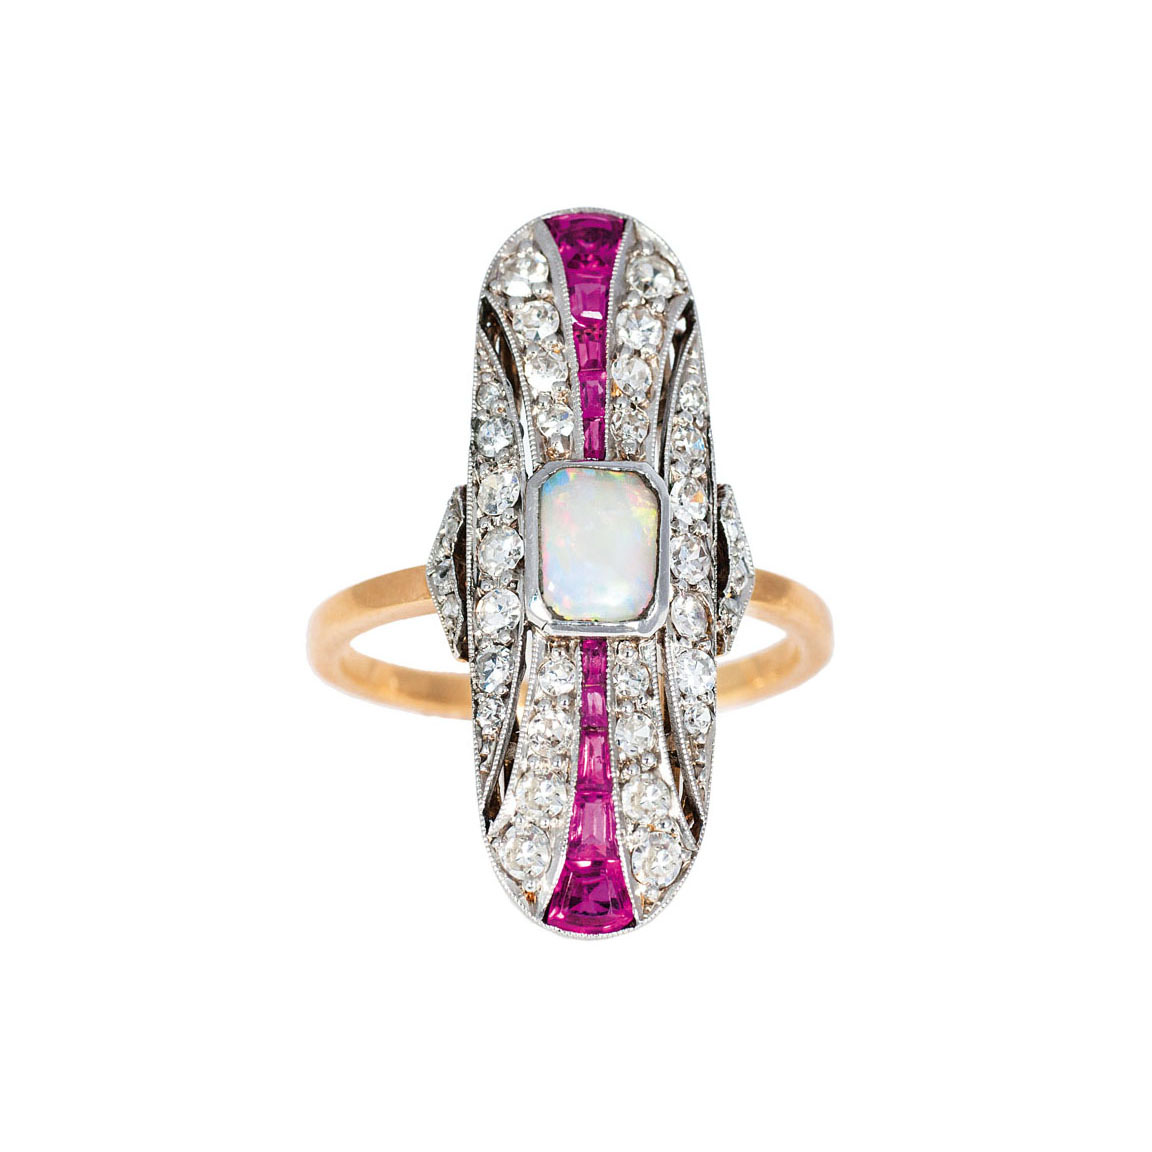 An Art Déco opal diamond ring with ruby setting